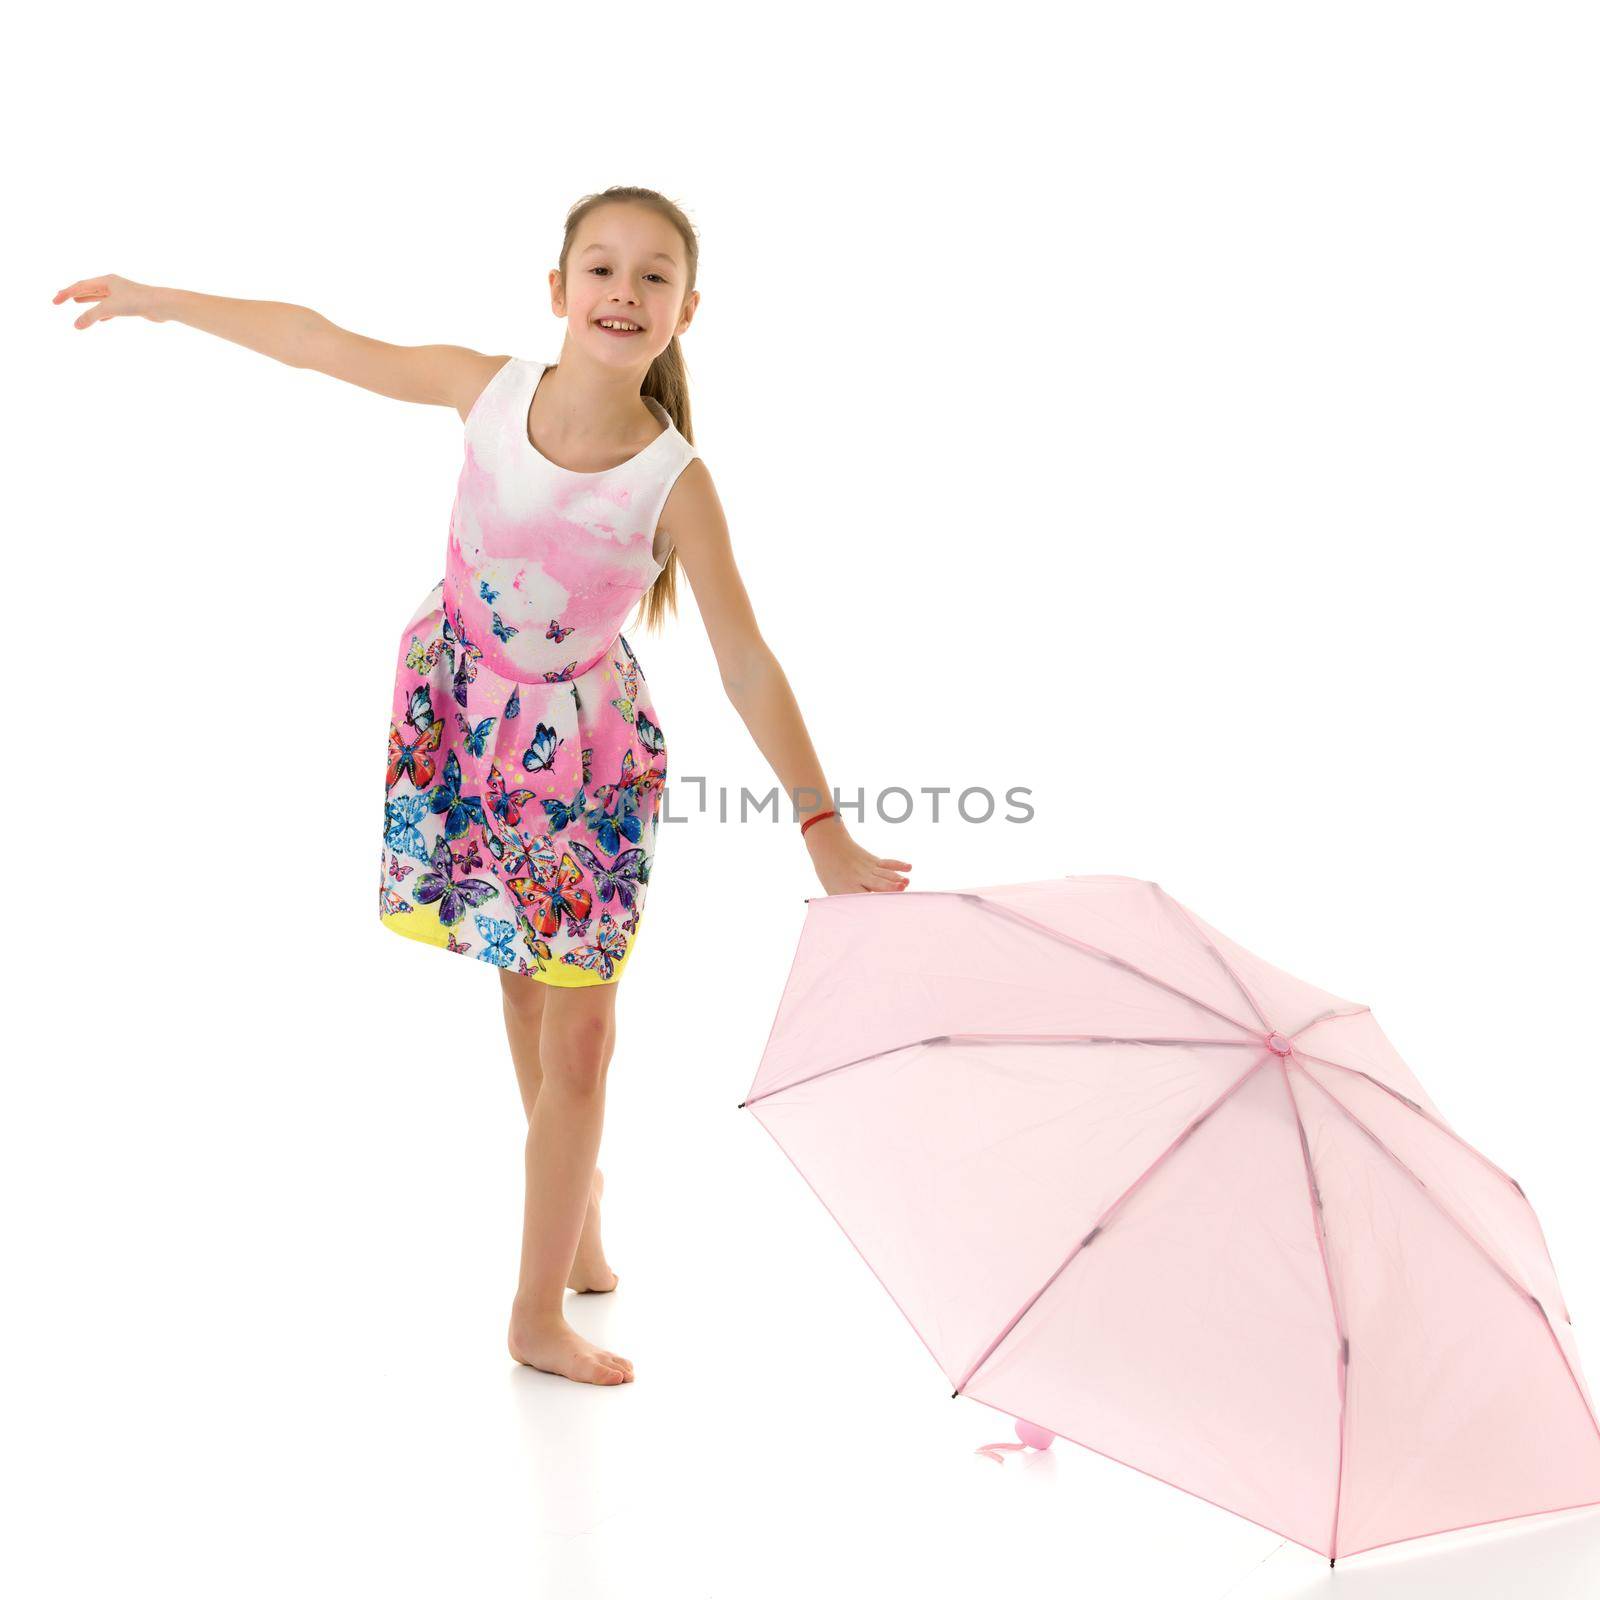 Little girl with umbrella.Concept style and fashion. Isolated on white background. by kolesnikov_studio